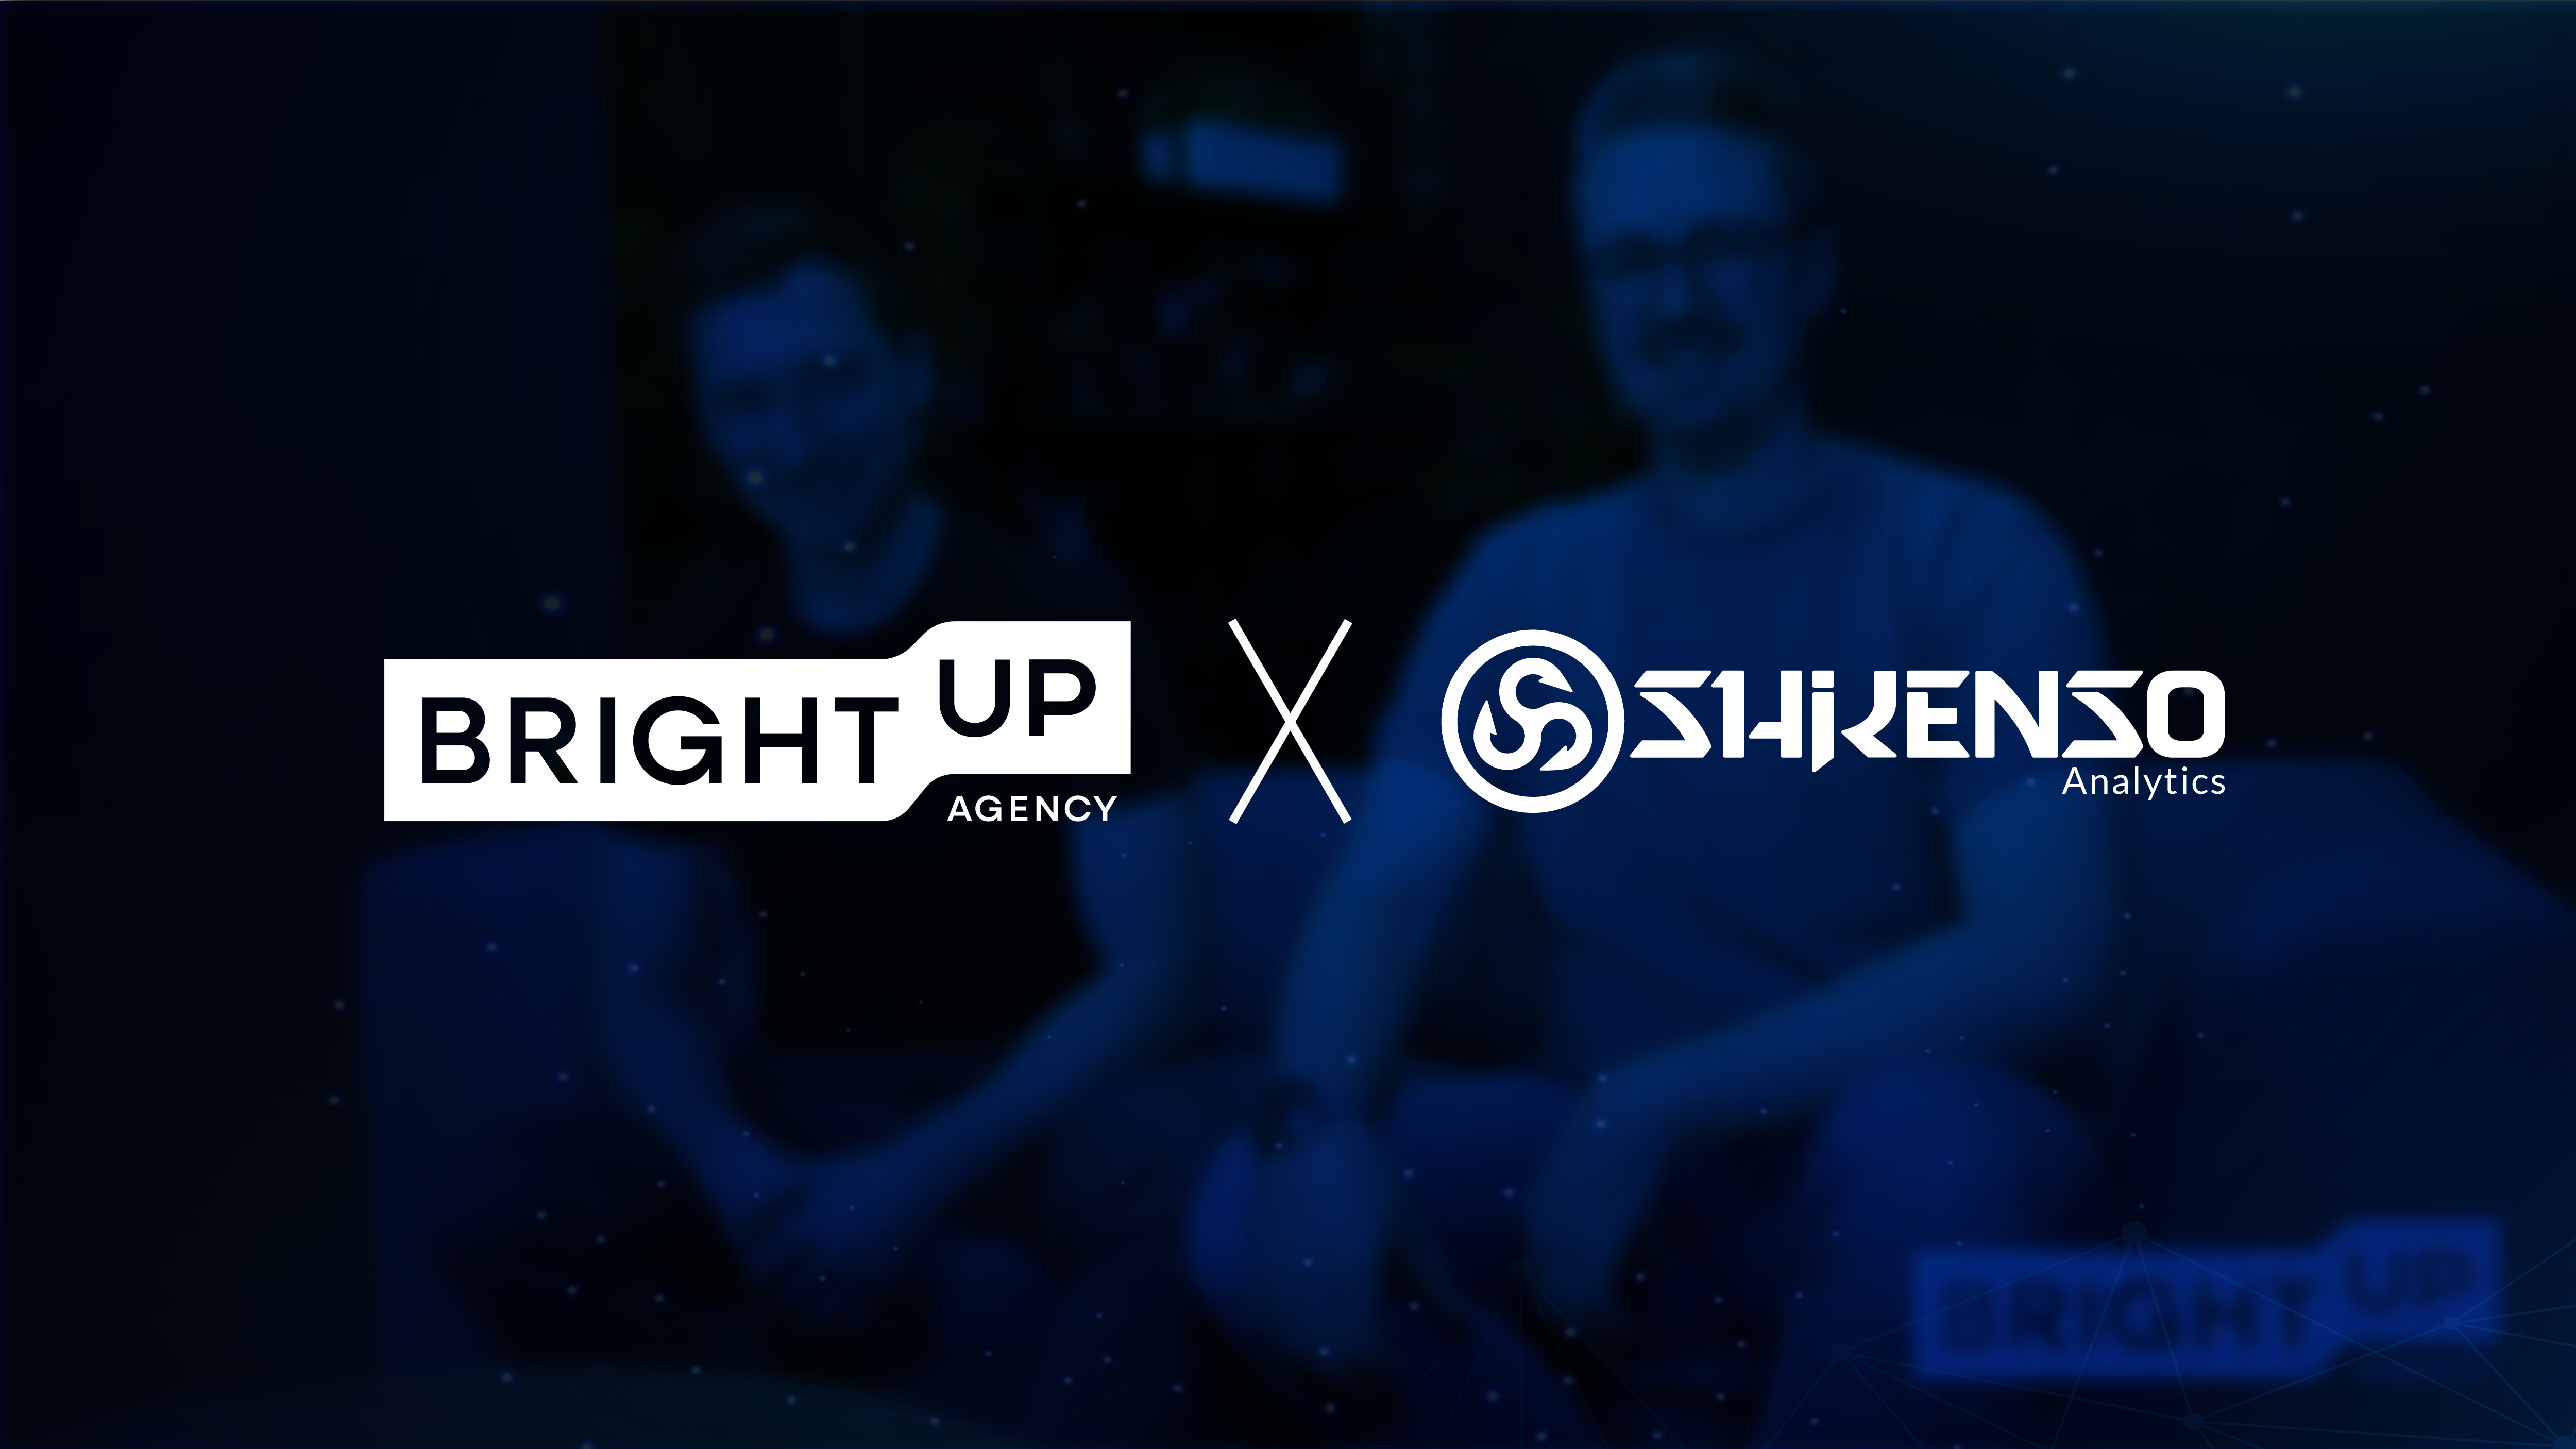 Bright Up Agency enters a strategic partnership with Shikenso Analytics, marking a pivotal moment in their pursuit of data-driven excellence